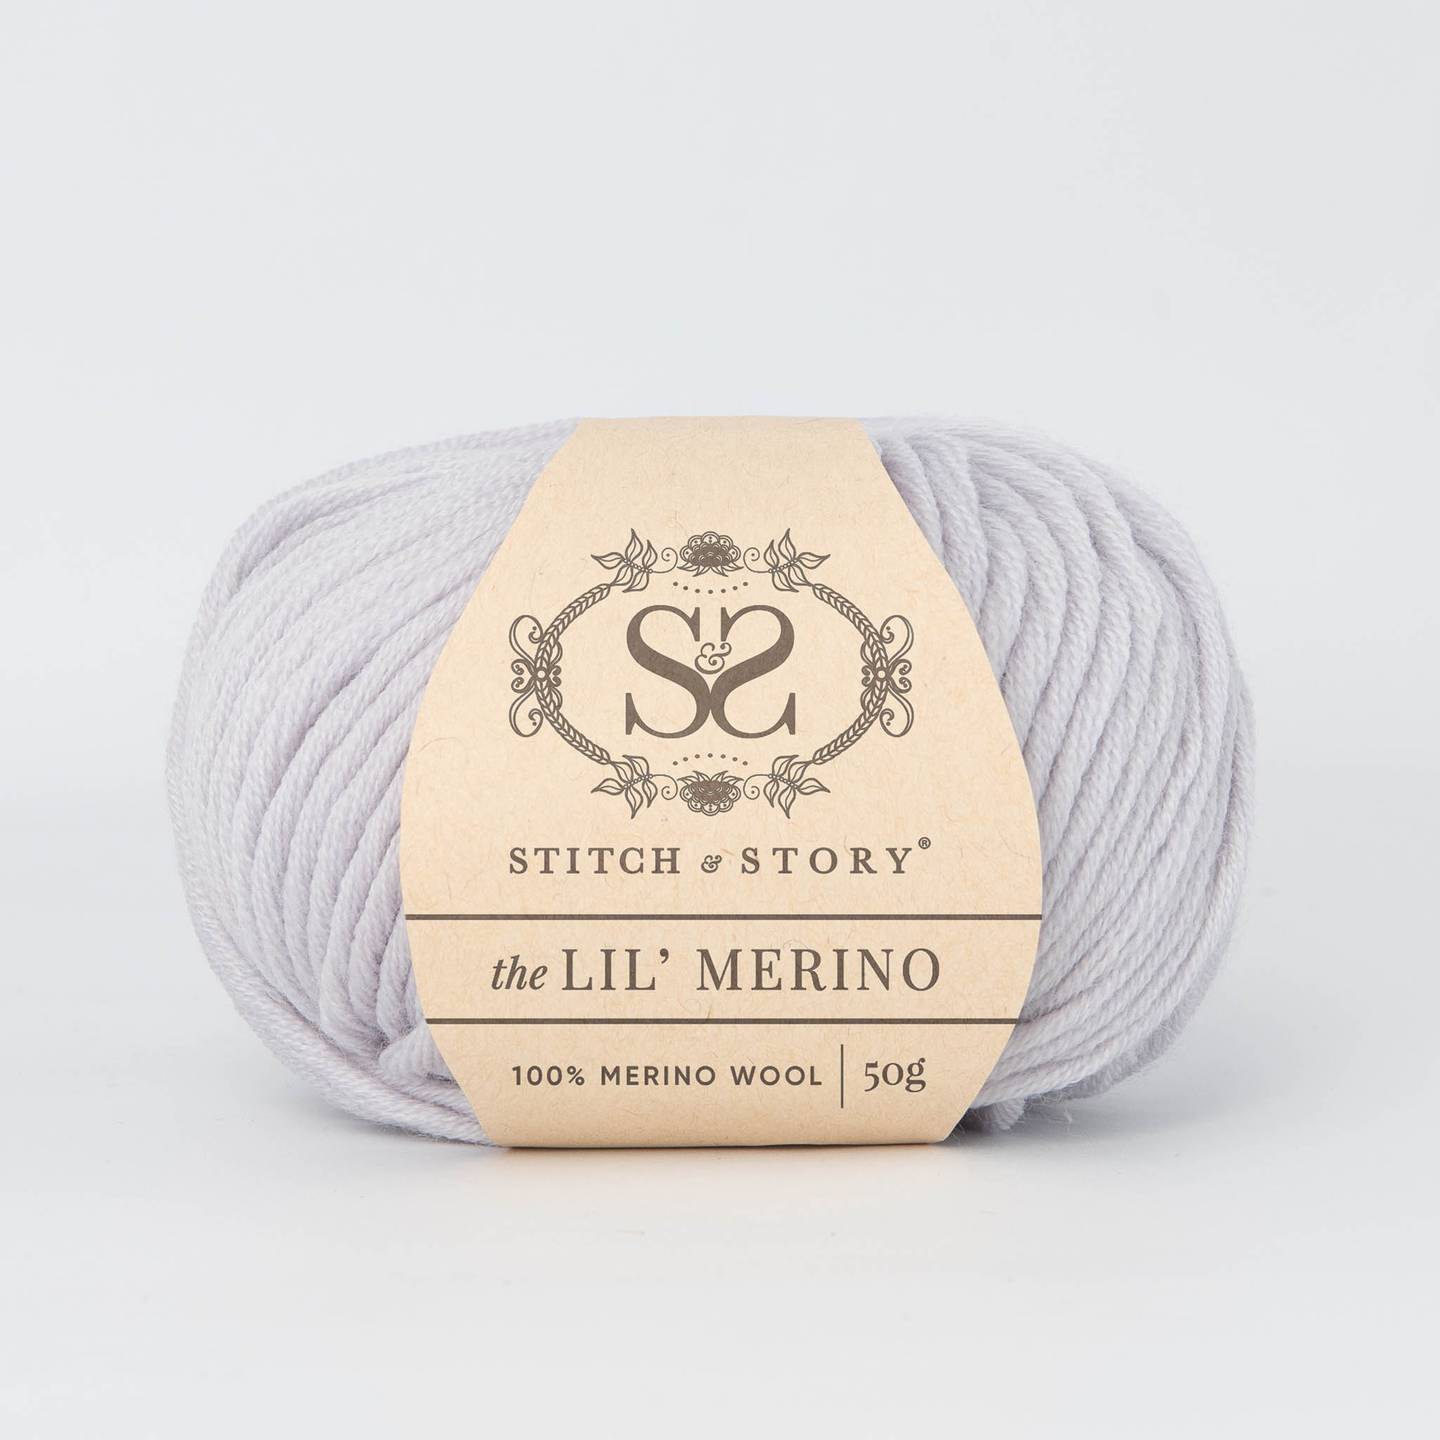 https://images.accentuate.io/?image=https%3A%2F%2Fcdn.accentuate.io%2F39334862815335%2F1630427763905%2FPN~lil-merino_PT~yarn_NOB~ss_PTS~packshots_COL~dove-grey_SN~01_low.jpg%3Fv%3D0&c_options=c_fit,w_1440,h_1440